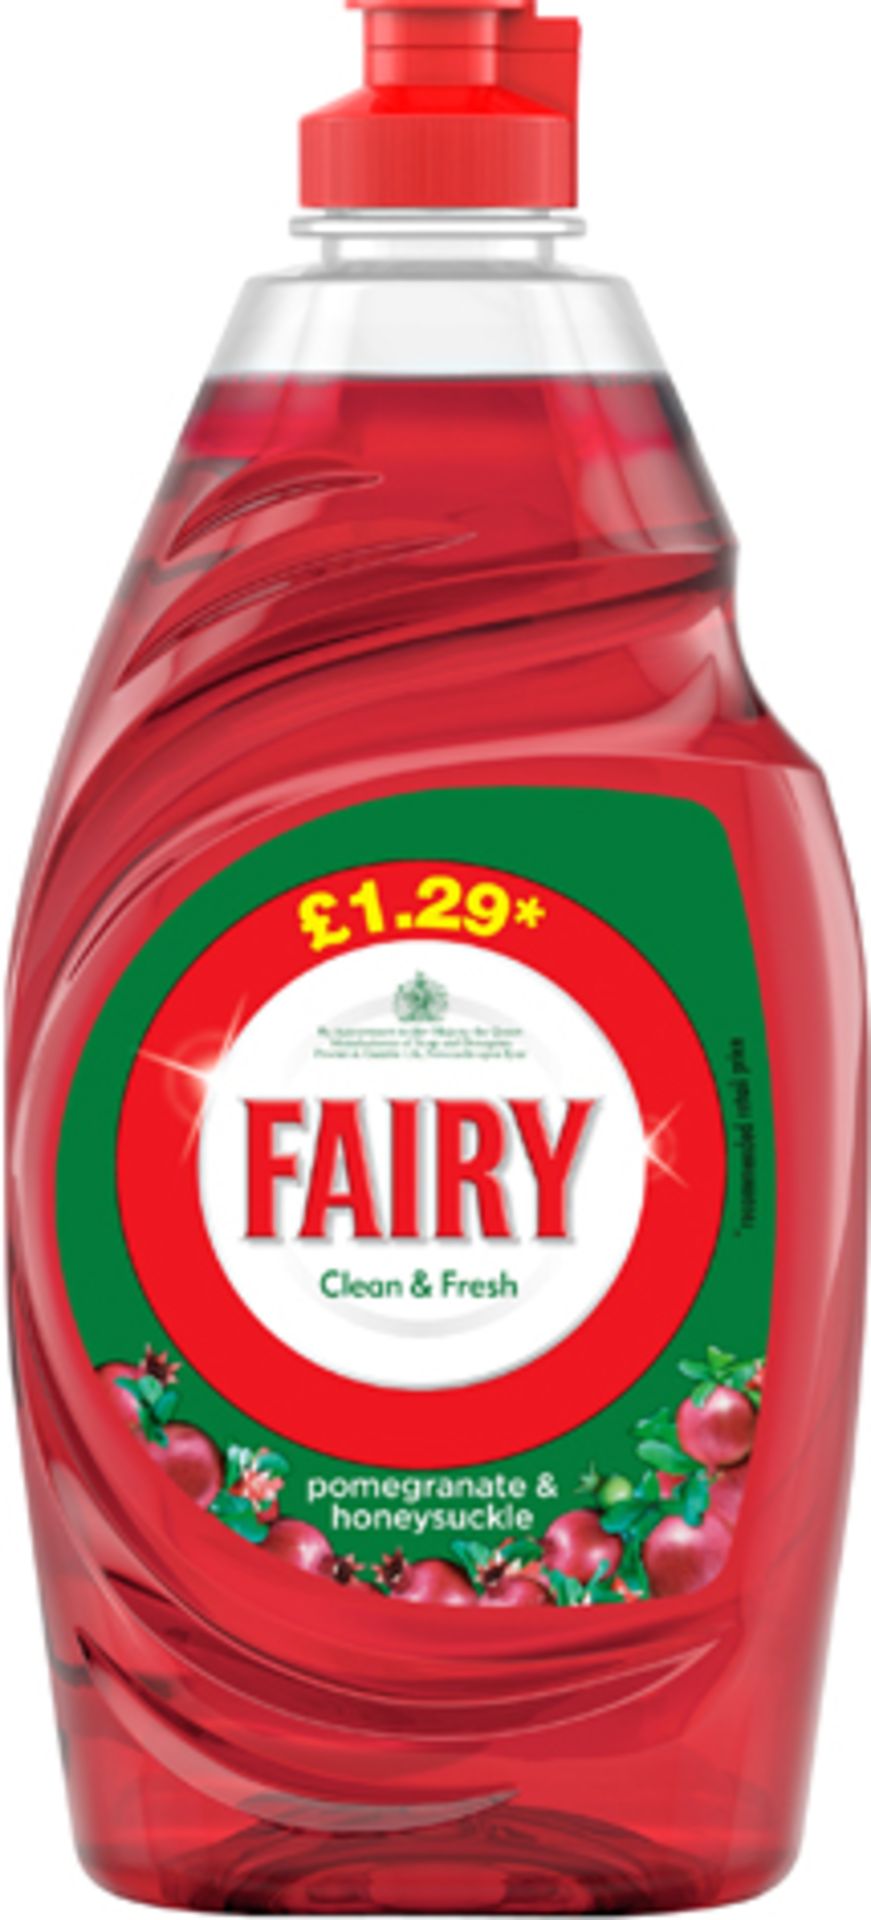 Fairy Washing Up Liquid Pomegranate 433ml x 20, Postage available by ParcelForce Express 48 £9.99